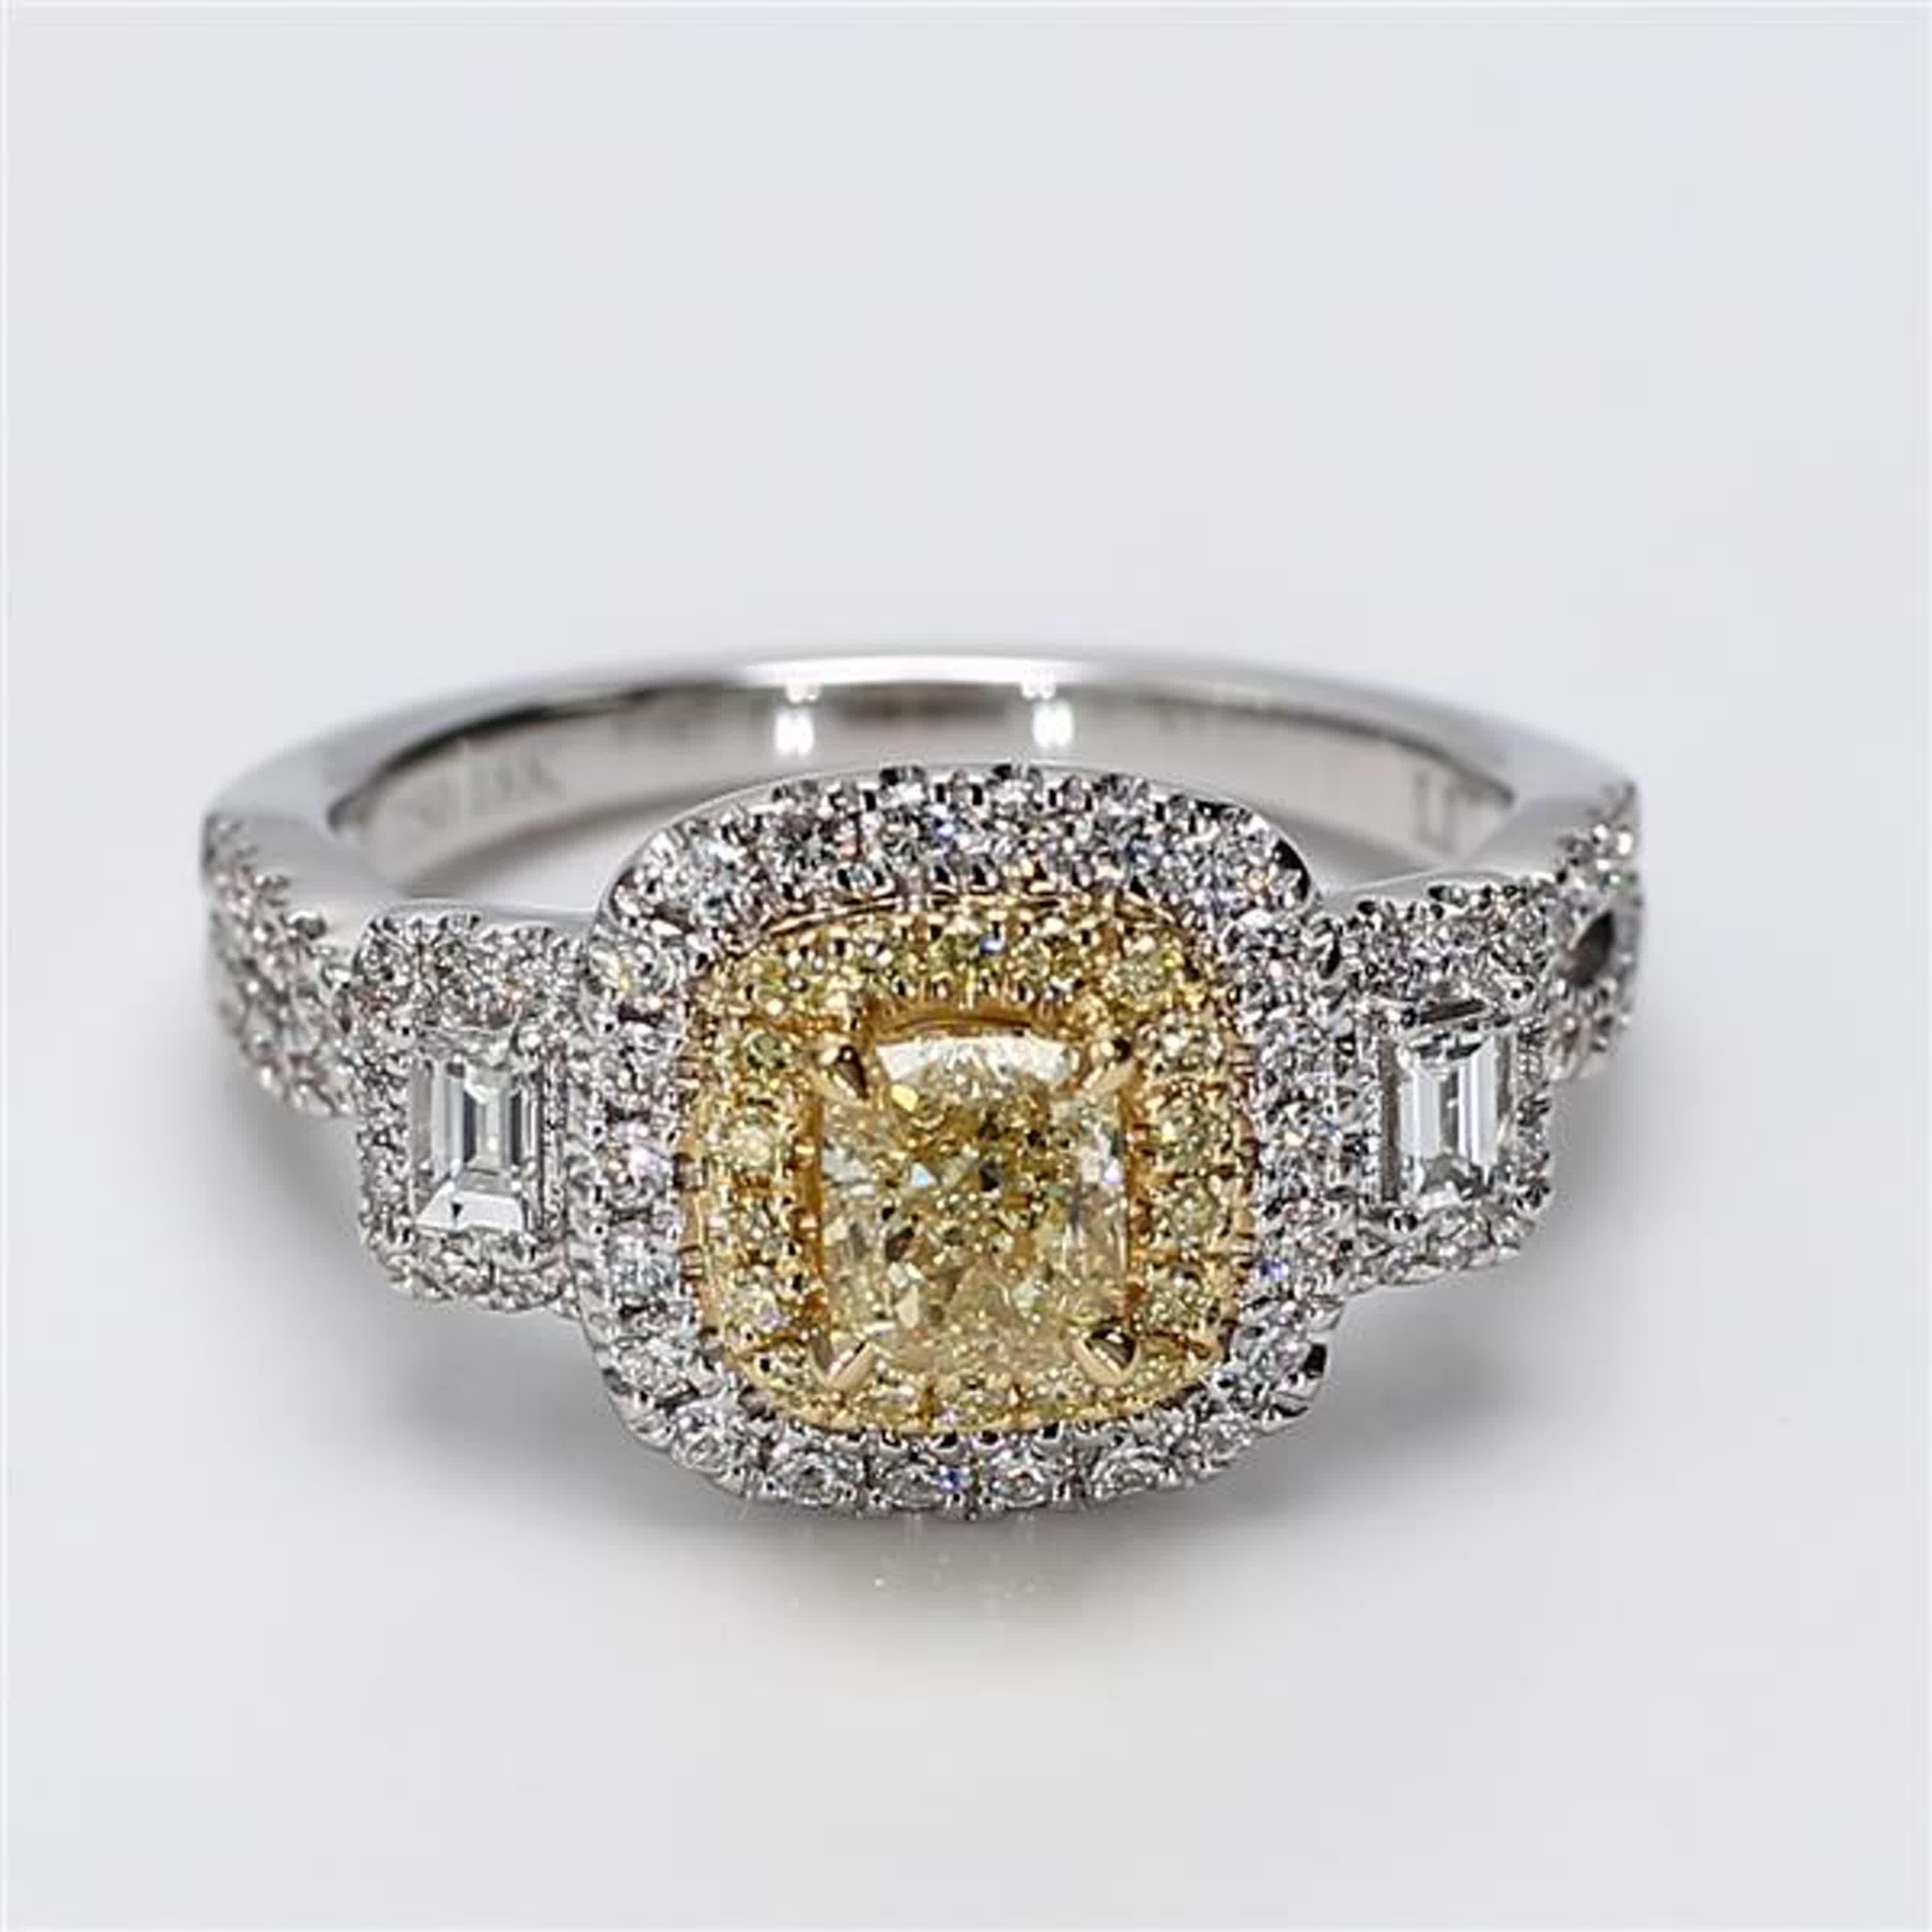 RareGemWorld's classic diamond ring. Mounted in a beautiful 18K Yellow and White Gold setting with a natural cushion cut yellow diamond. The yellow diamond is surrounded by natural baguette cut white diamonds, round natural white diamond melee, and